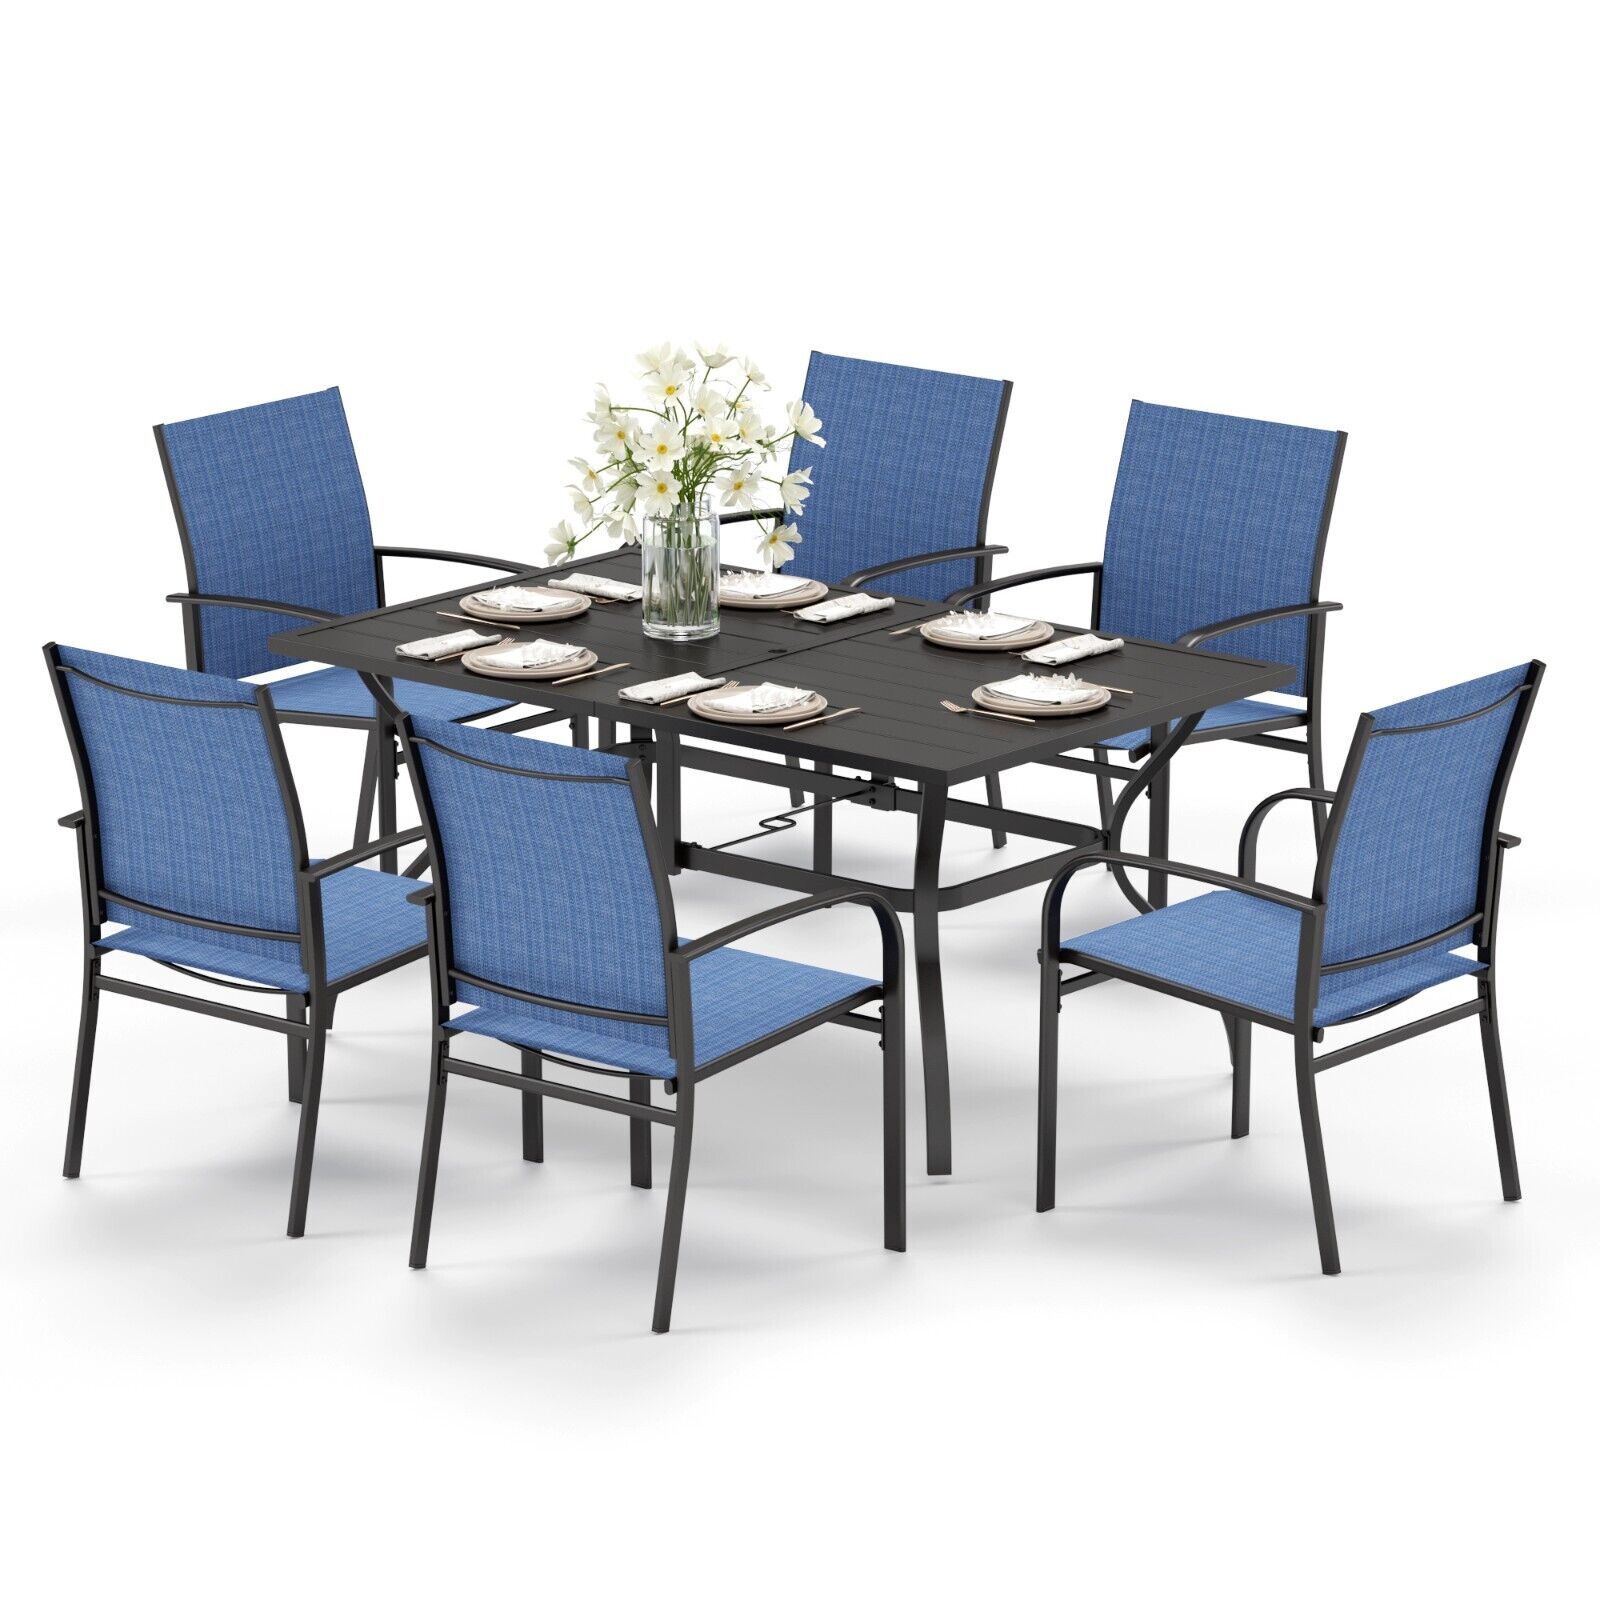 7 Piece Patio Dining Furniture Set Outdoor Table Chairs Set Textilene Chairs Set